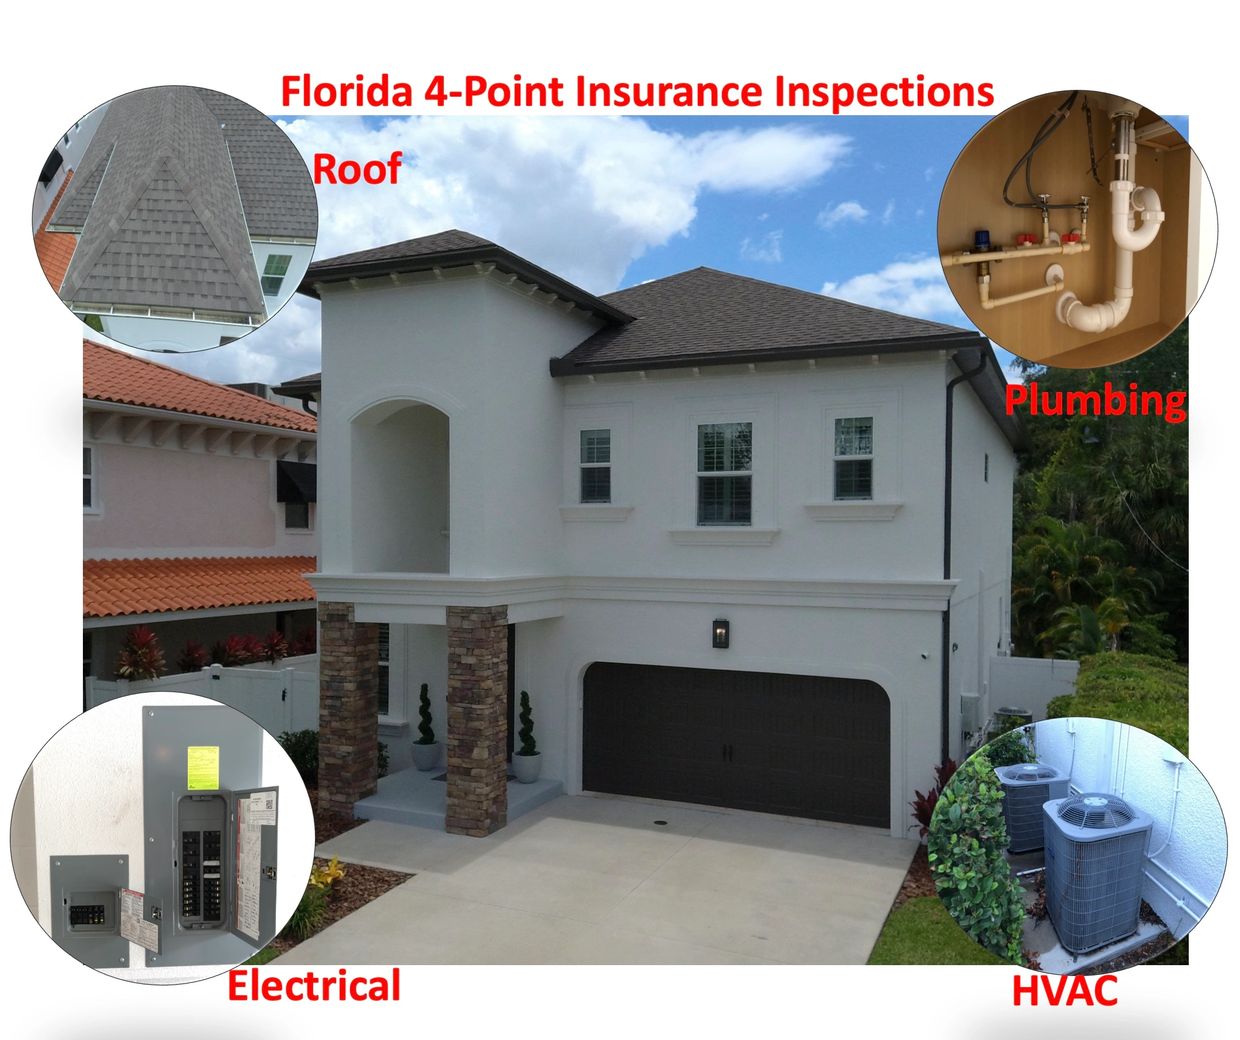 Video Camera Inspection for Florida Residential Homes